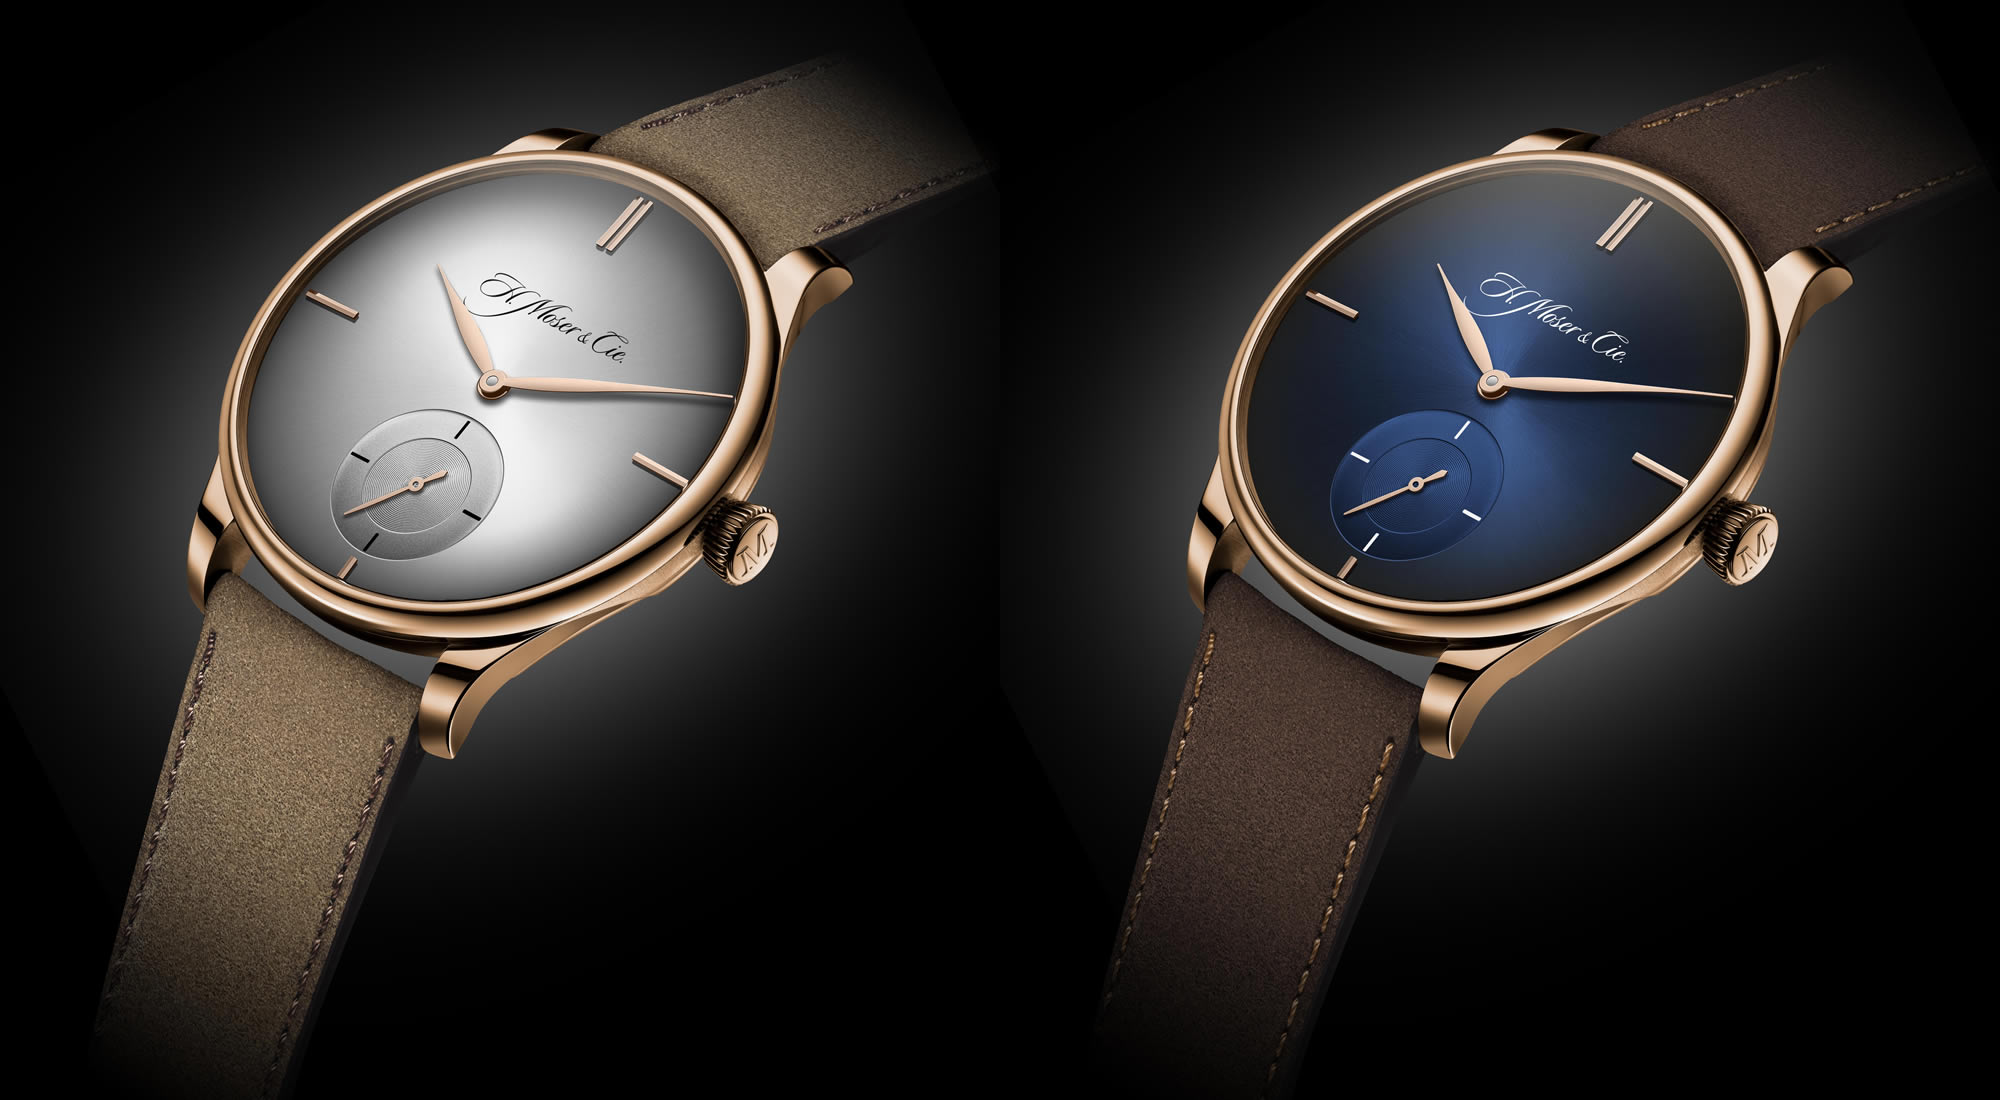 THE VENTURER SMALL SECONDS XL PURITY BY H. MOSER & CIE.